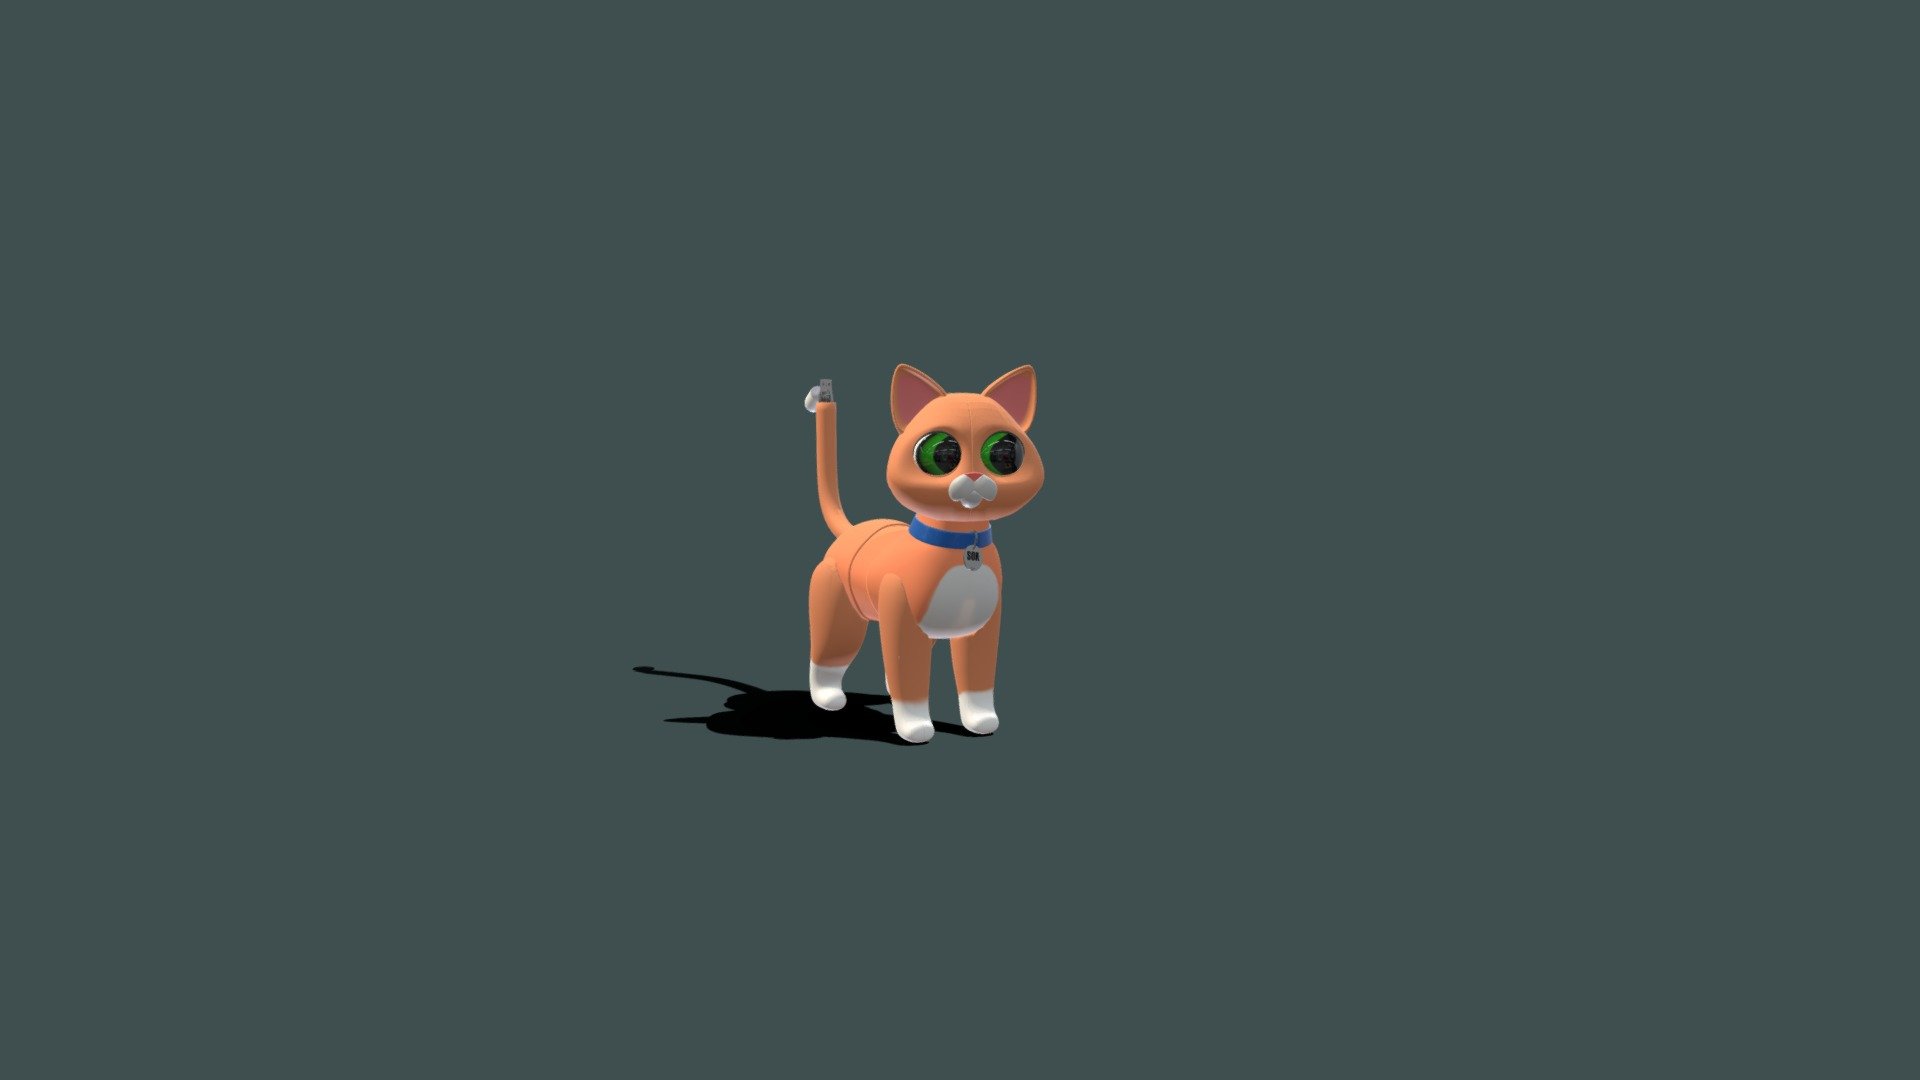 Sox cat from Light Year Animation

We made a model of Sox from Light Year Animation Movie. we model in blender and rigged. Ready to animate. we hope you will like our model. Thank you! If you need anything contact me. ichiryu25@gmail.com and neilnyinyi1997@gmail.com
https://sketchfab.com/Ryu.Ichi
https://youtu.be/eXPZjX_uxcU
 - Lightyear's Sox - 3D model by Nyilonelycompany 3d model